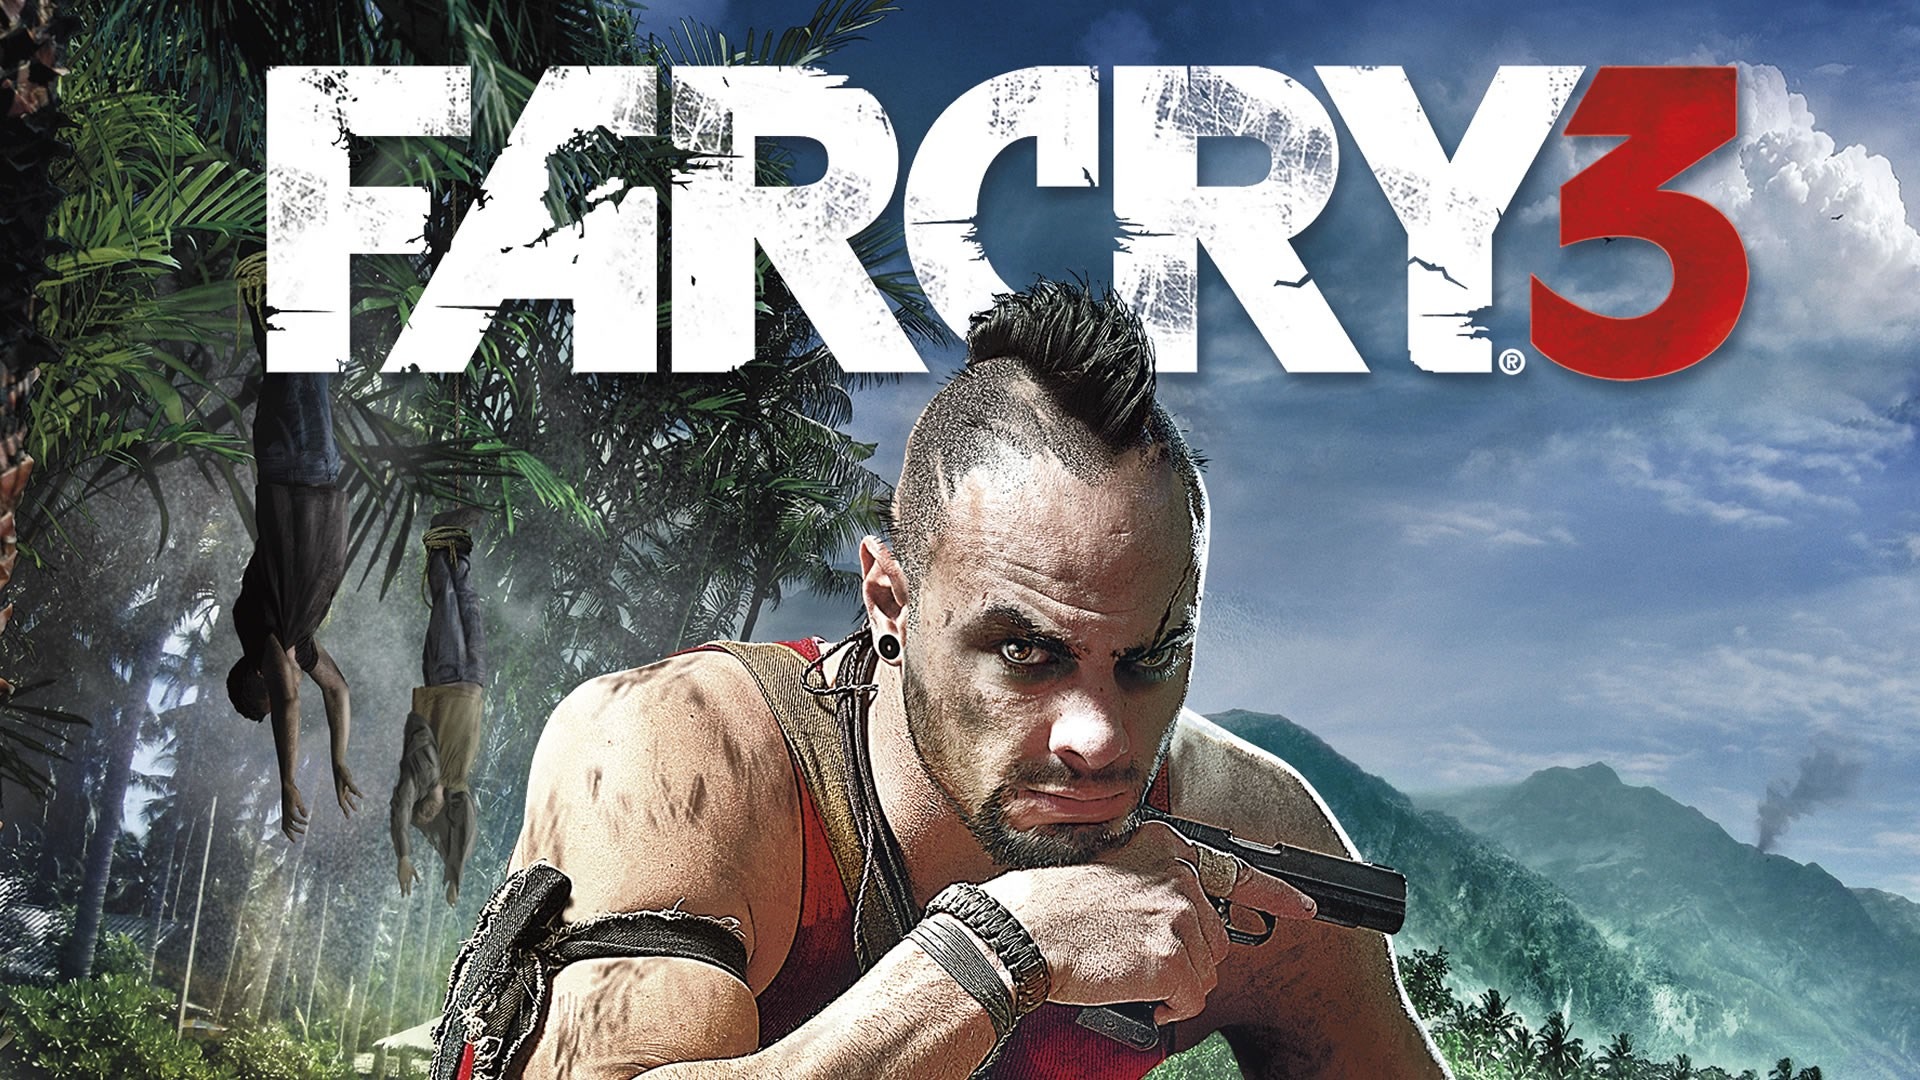 download farcry 6 ps5 for free